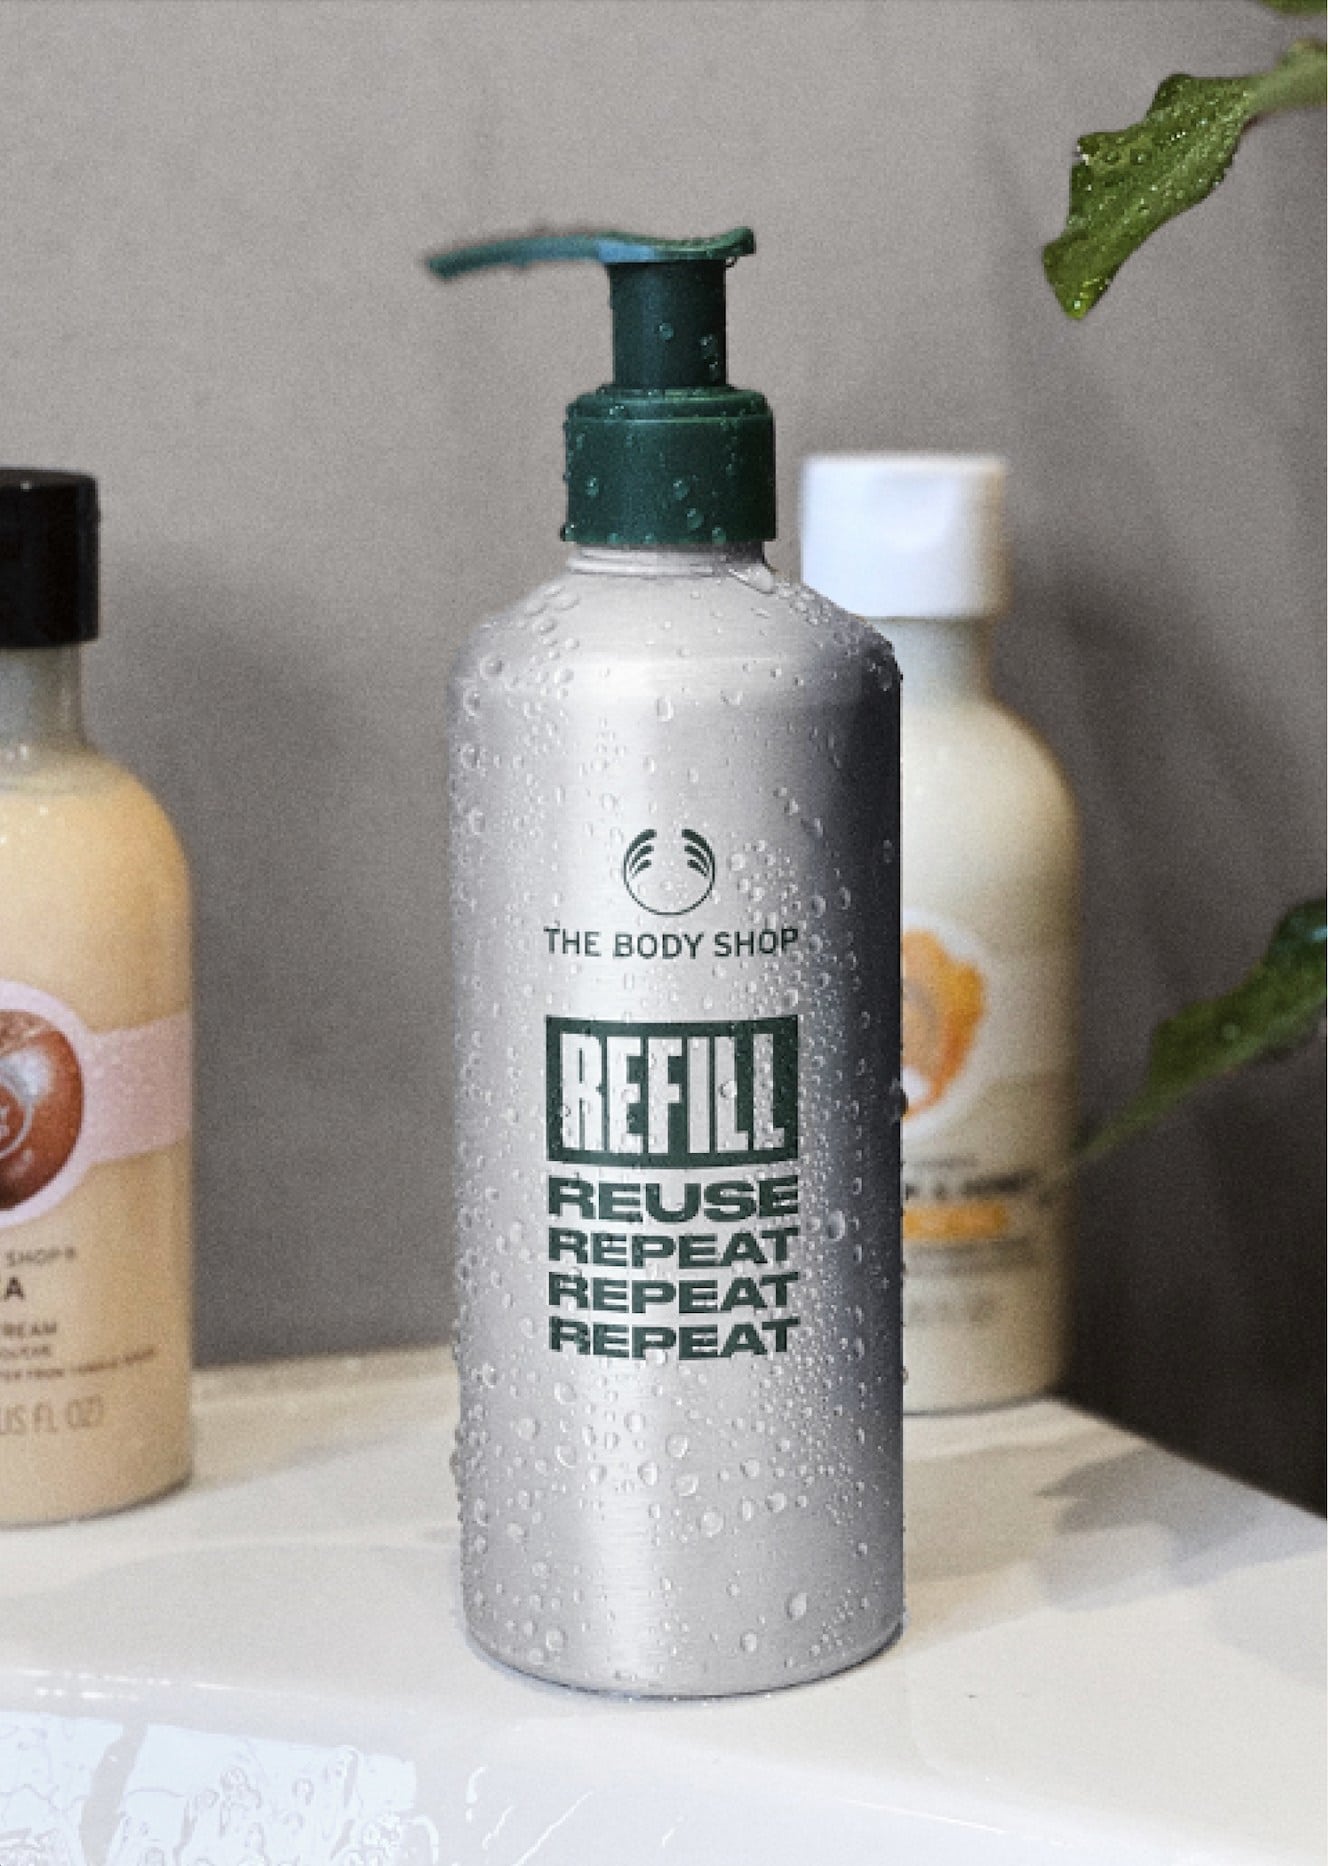 The Body Shop Refill Packaging